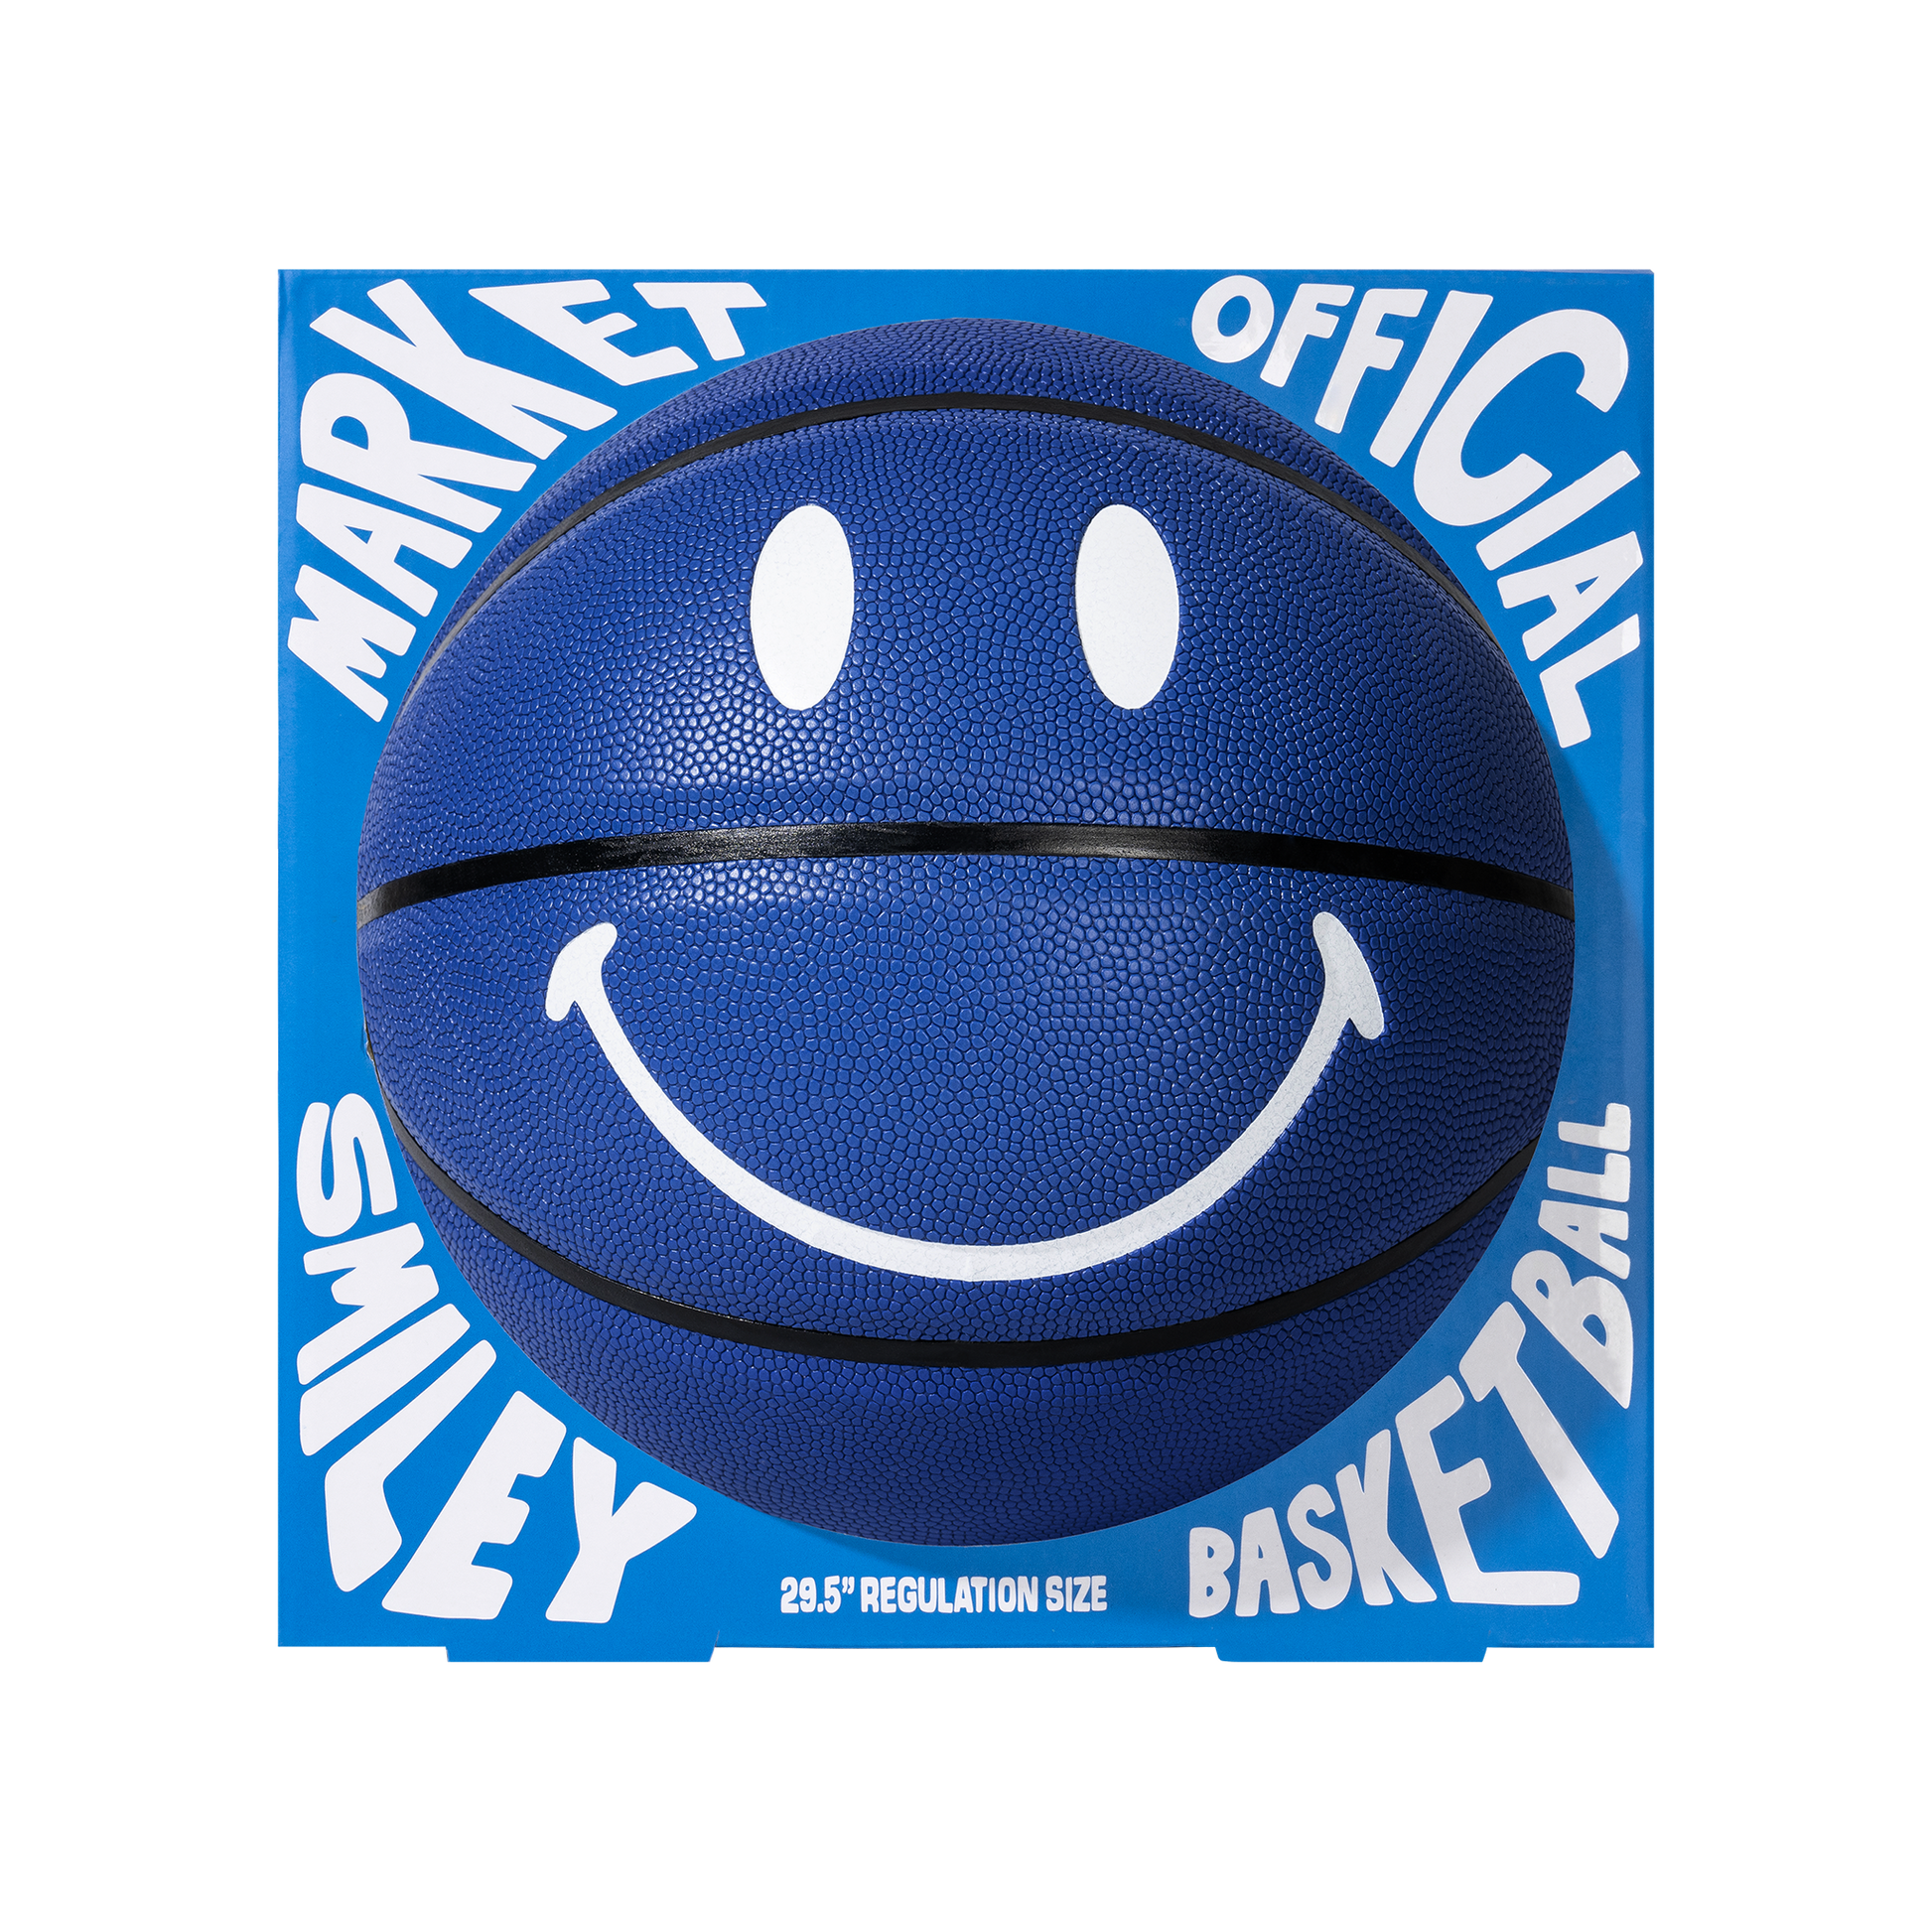 MARKET clothing brand SMILEY BLUE BASKETBALL. Find more basketballs, sporting goods, homegoods and graphic tees at MarketStudios.com. Formally Chinatown Market. 